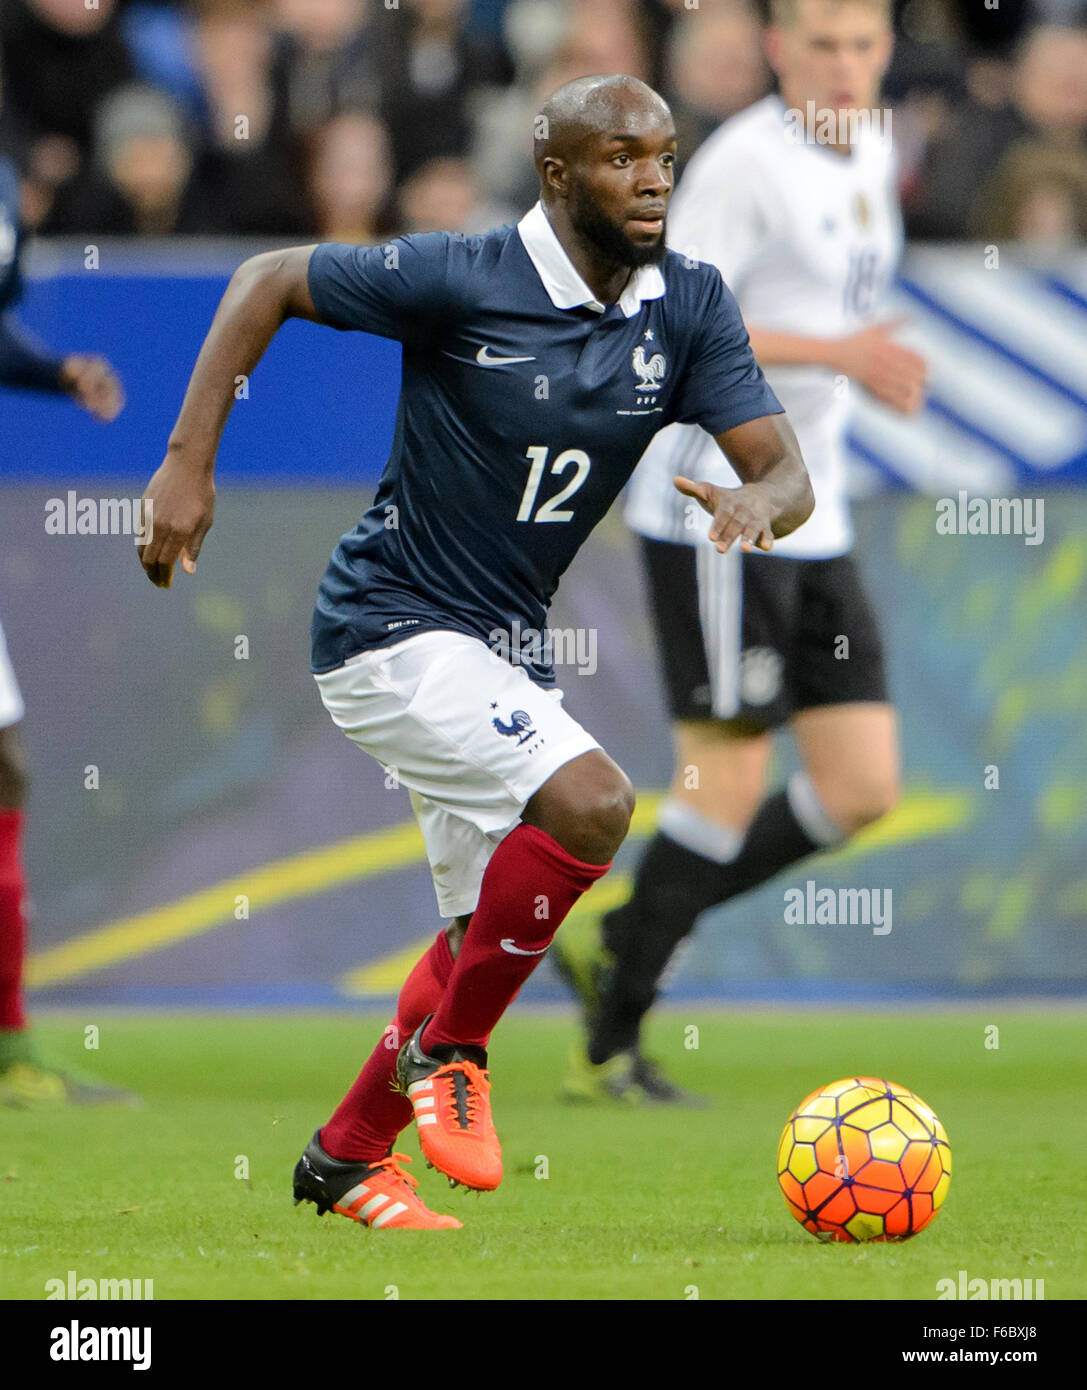 France's Lassana Diarra in action during the international soccer friendly France vs Germany in Paris, France, 13 November 2015. Photo: Thomas Eisenhuth/dpa - NO WIRE SERVICE - Stock Photo